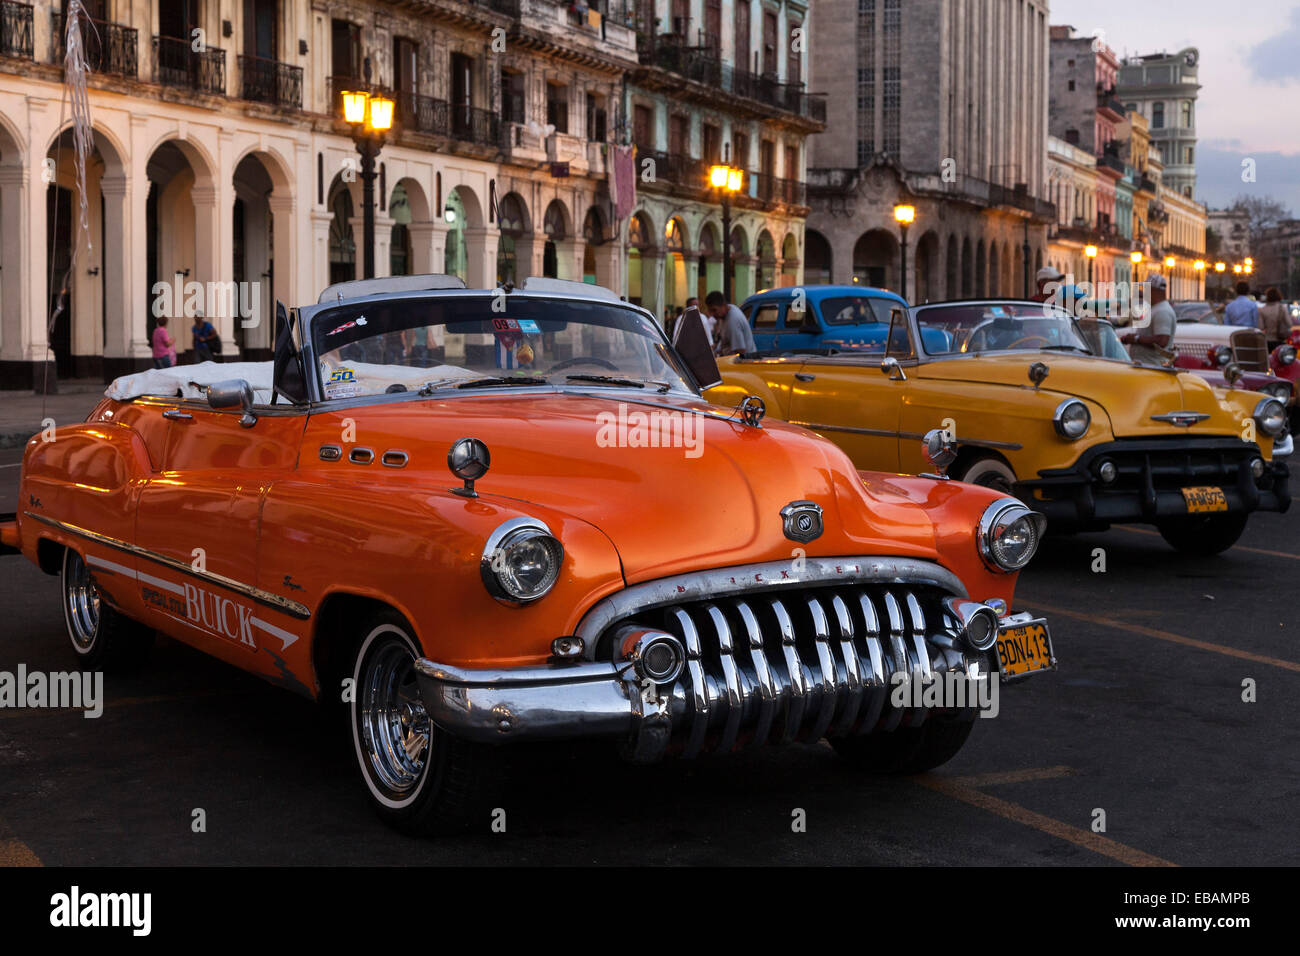 Vintage cars on the Prado at dusk, at the front a Buick from the 1950s, Havana, Cuba Stock Photo